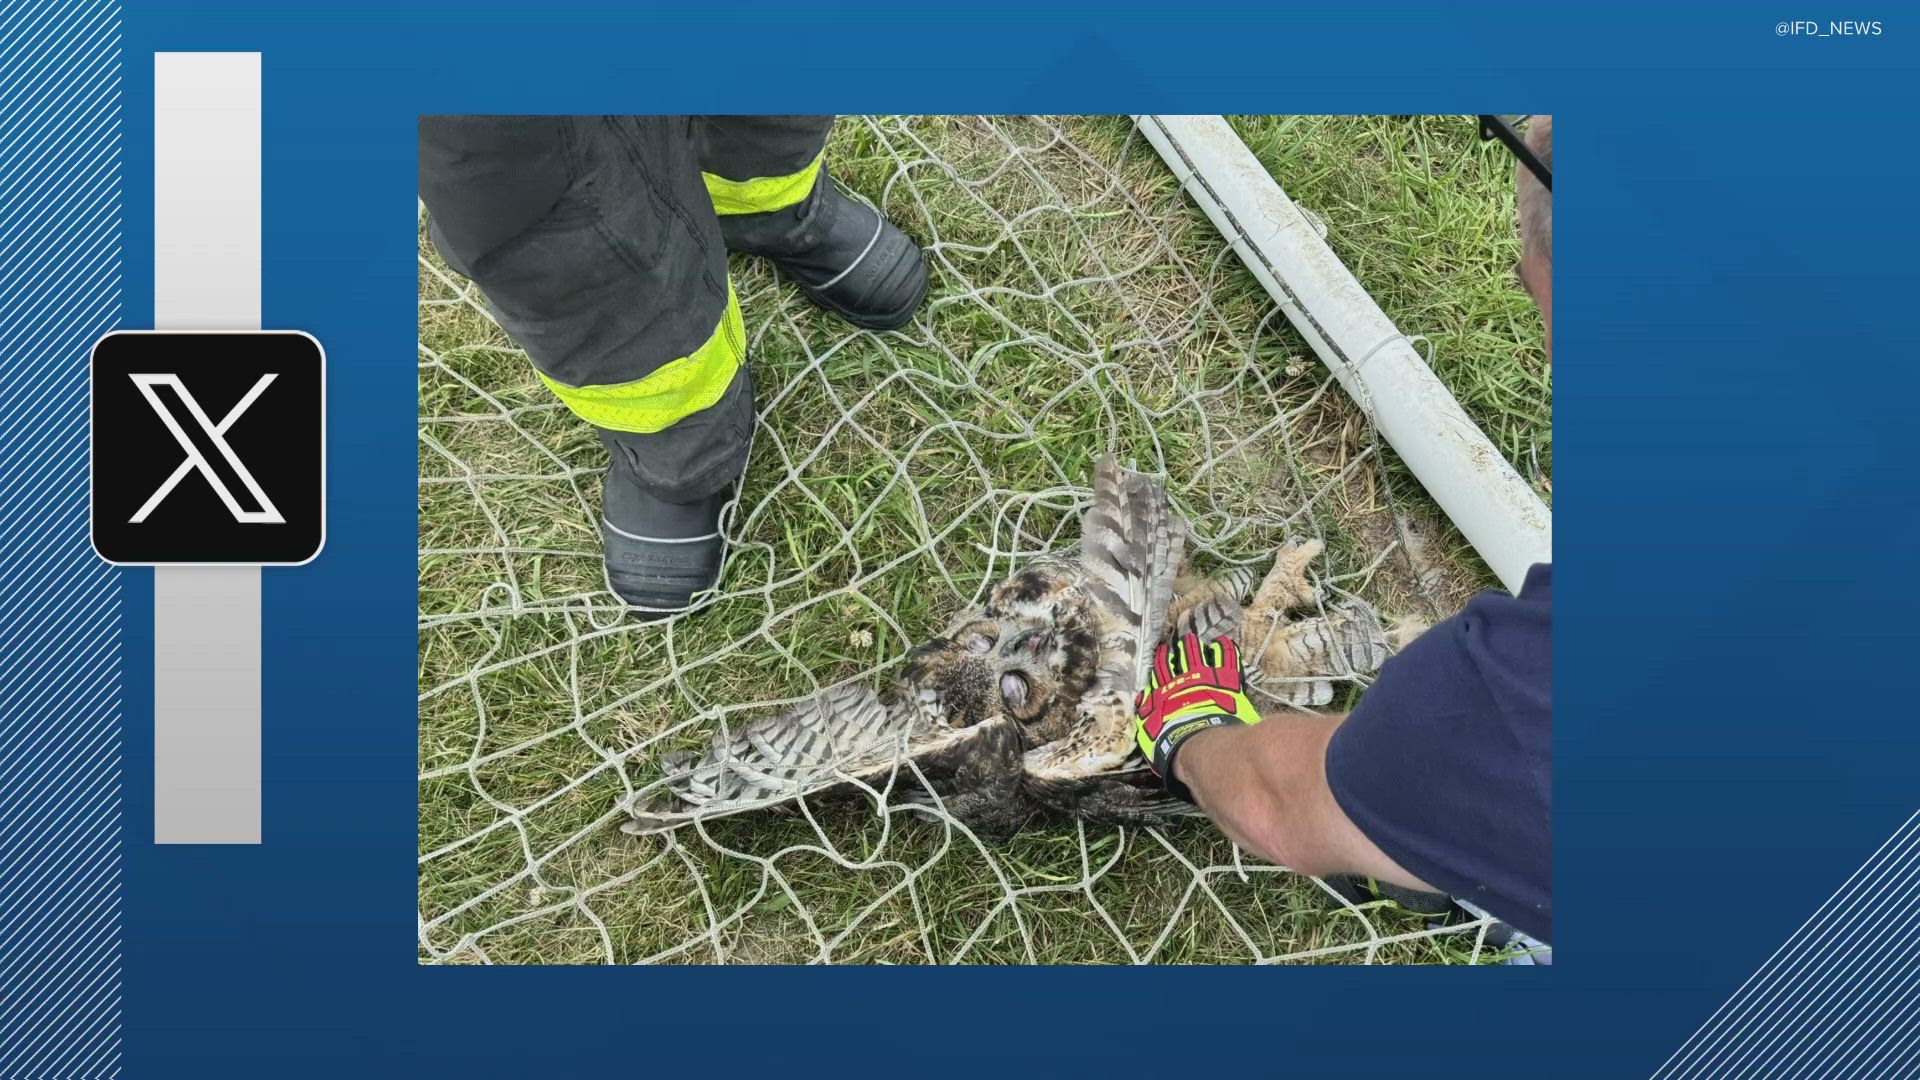 A person stopped by IFD Station 35 Saturday concerned about the owl stuck in a soccer net.